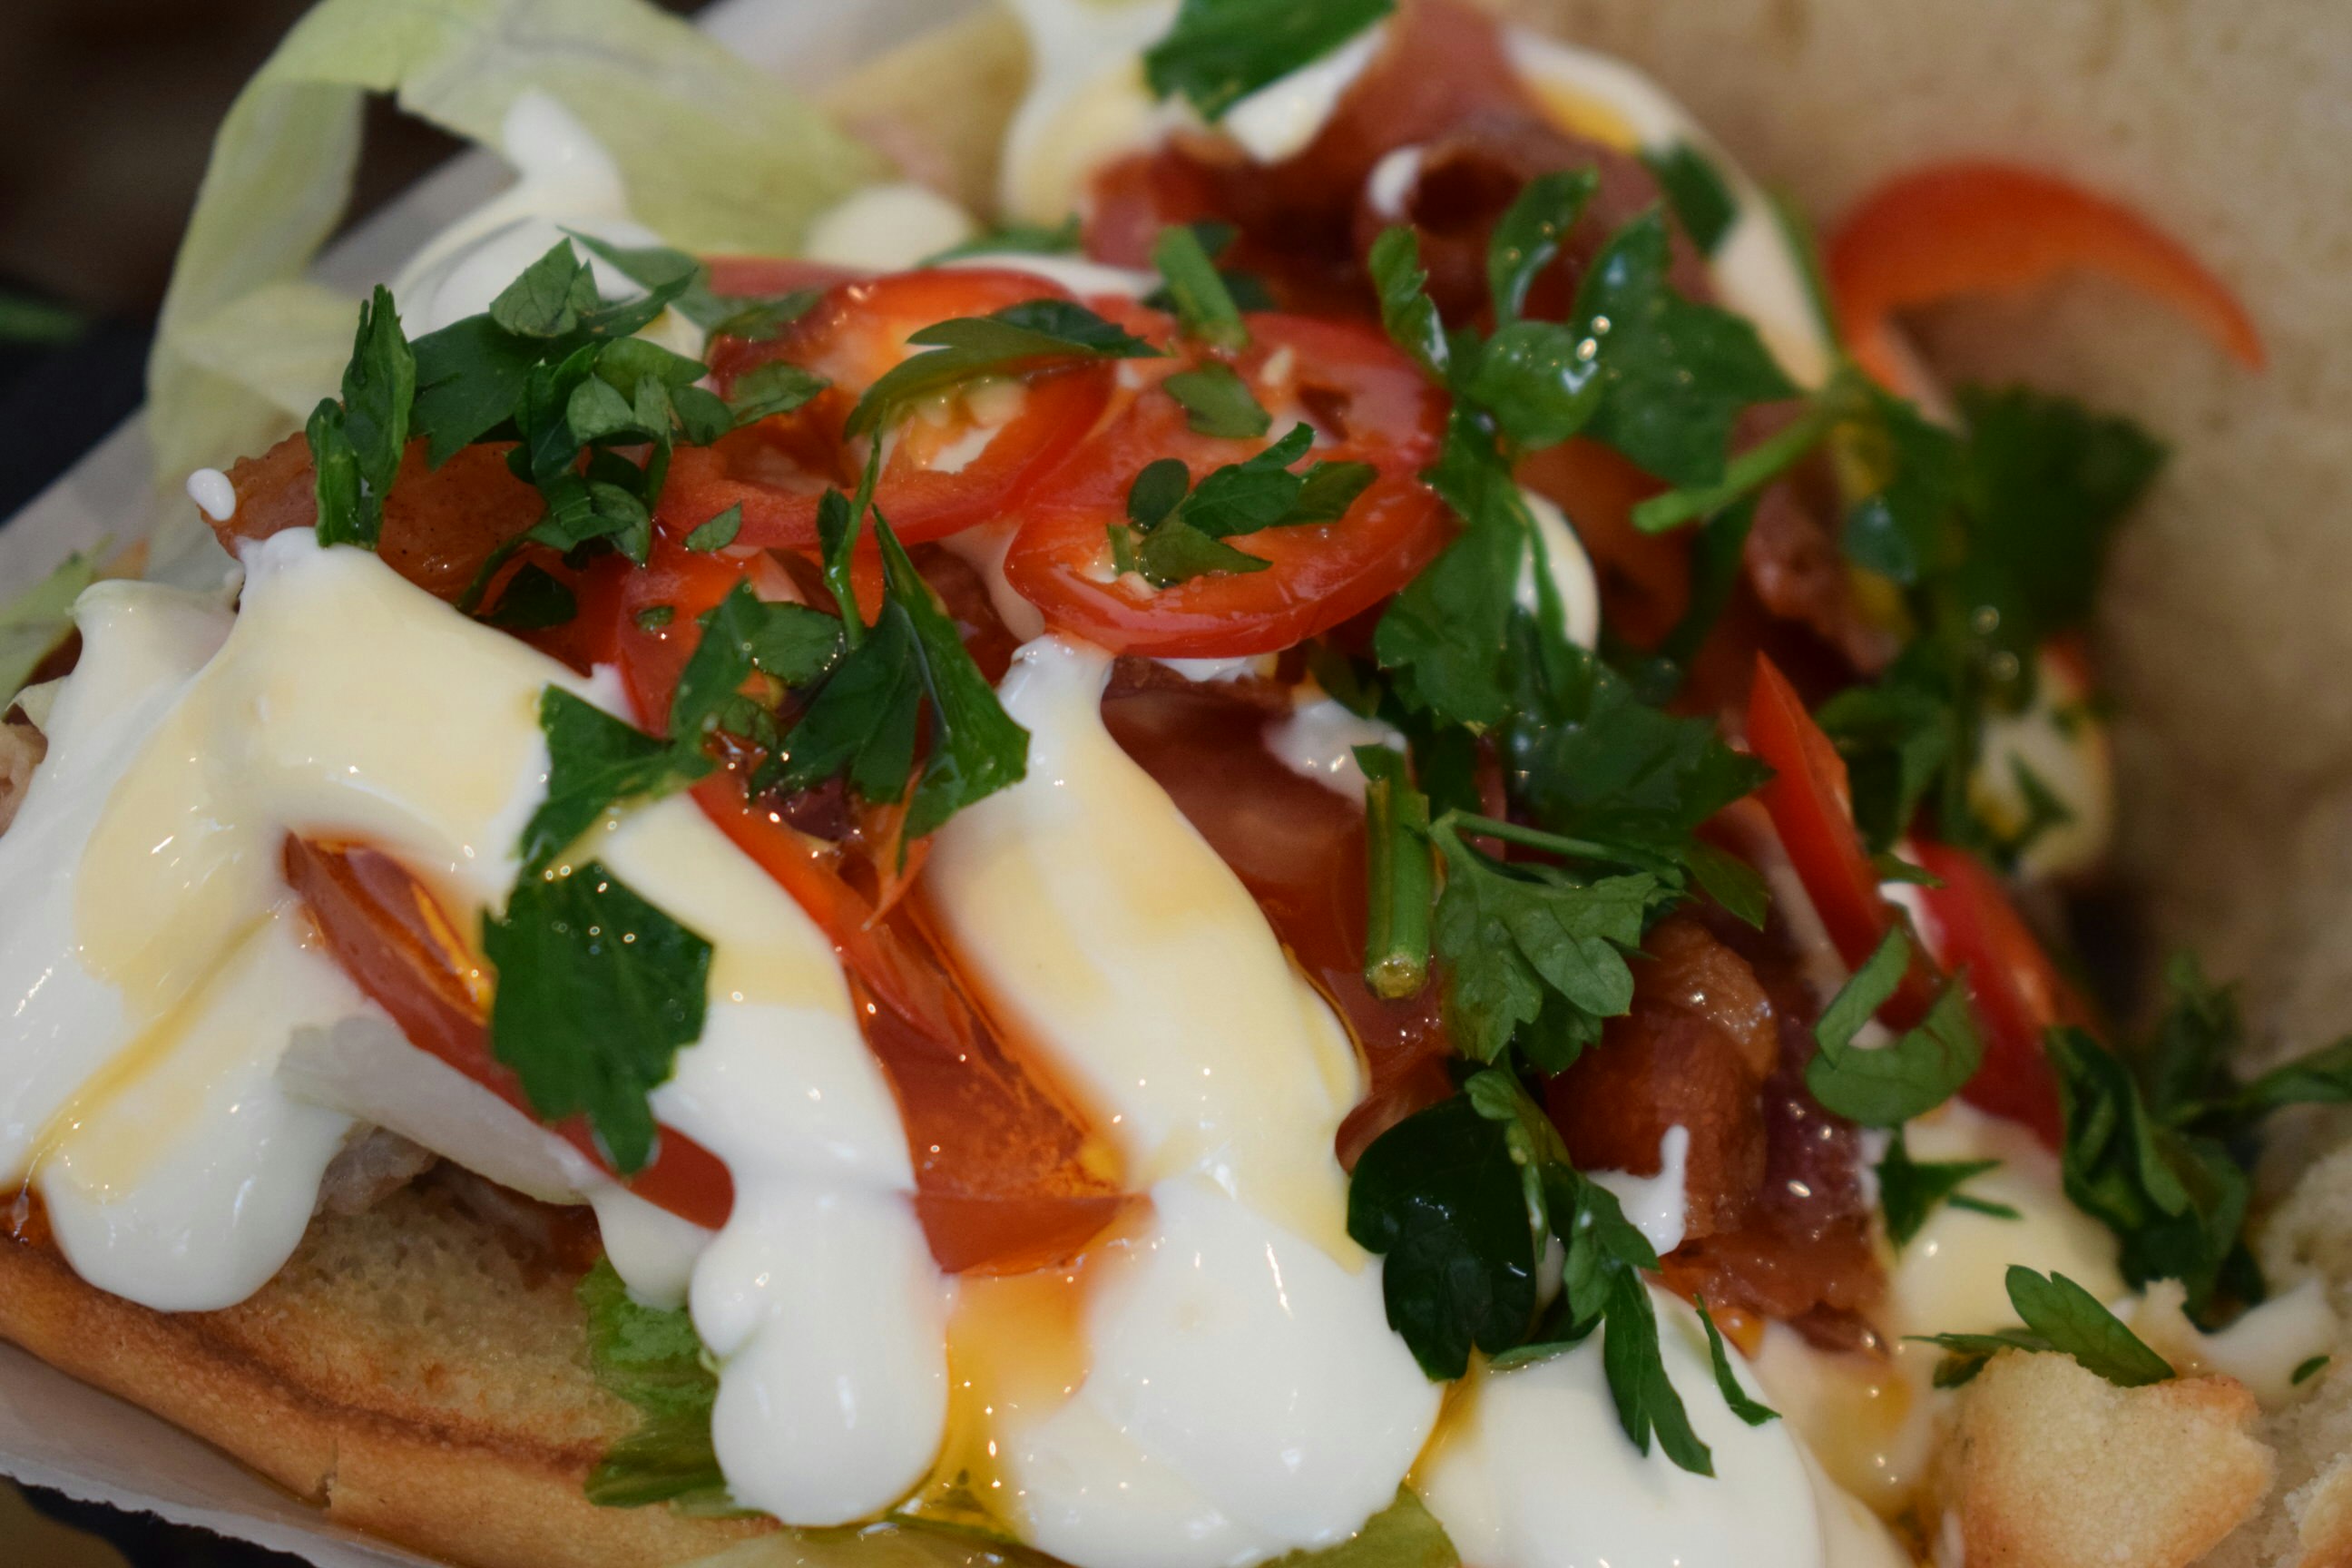 Close-up of an open sandwich made with cheese, tomatoes, chillies and parsley © Violetta Teetor